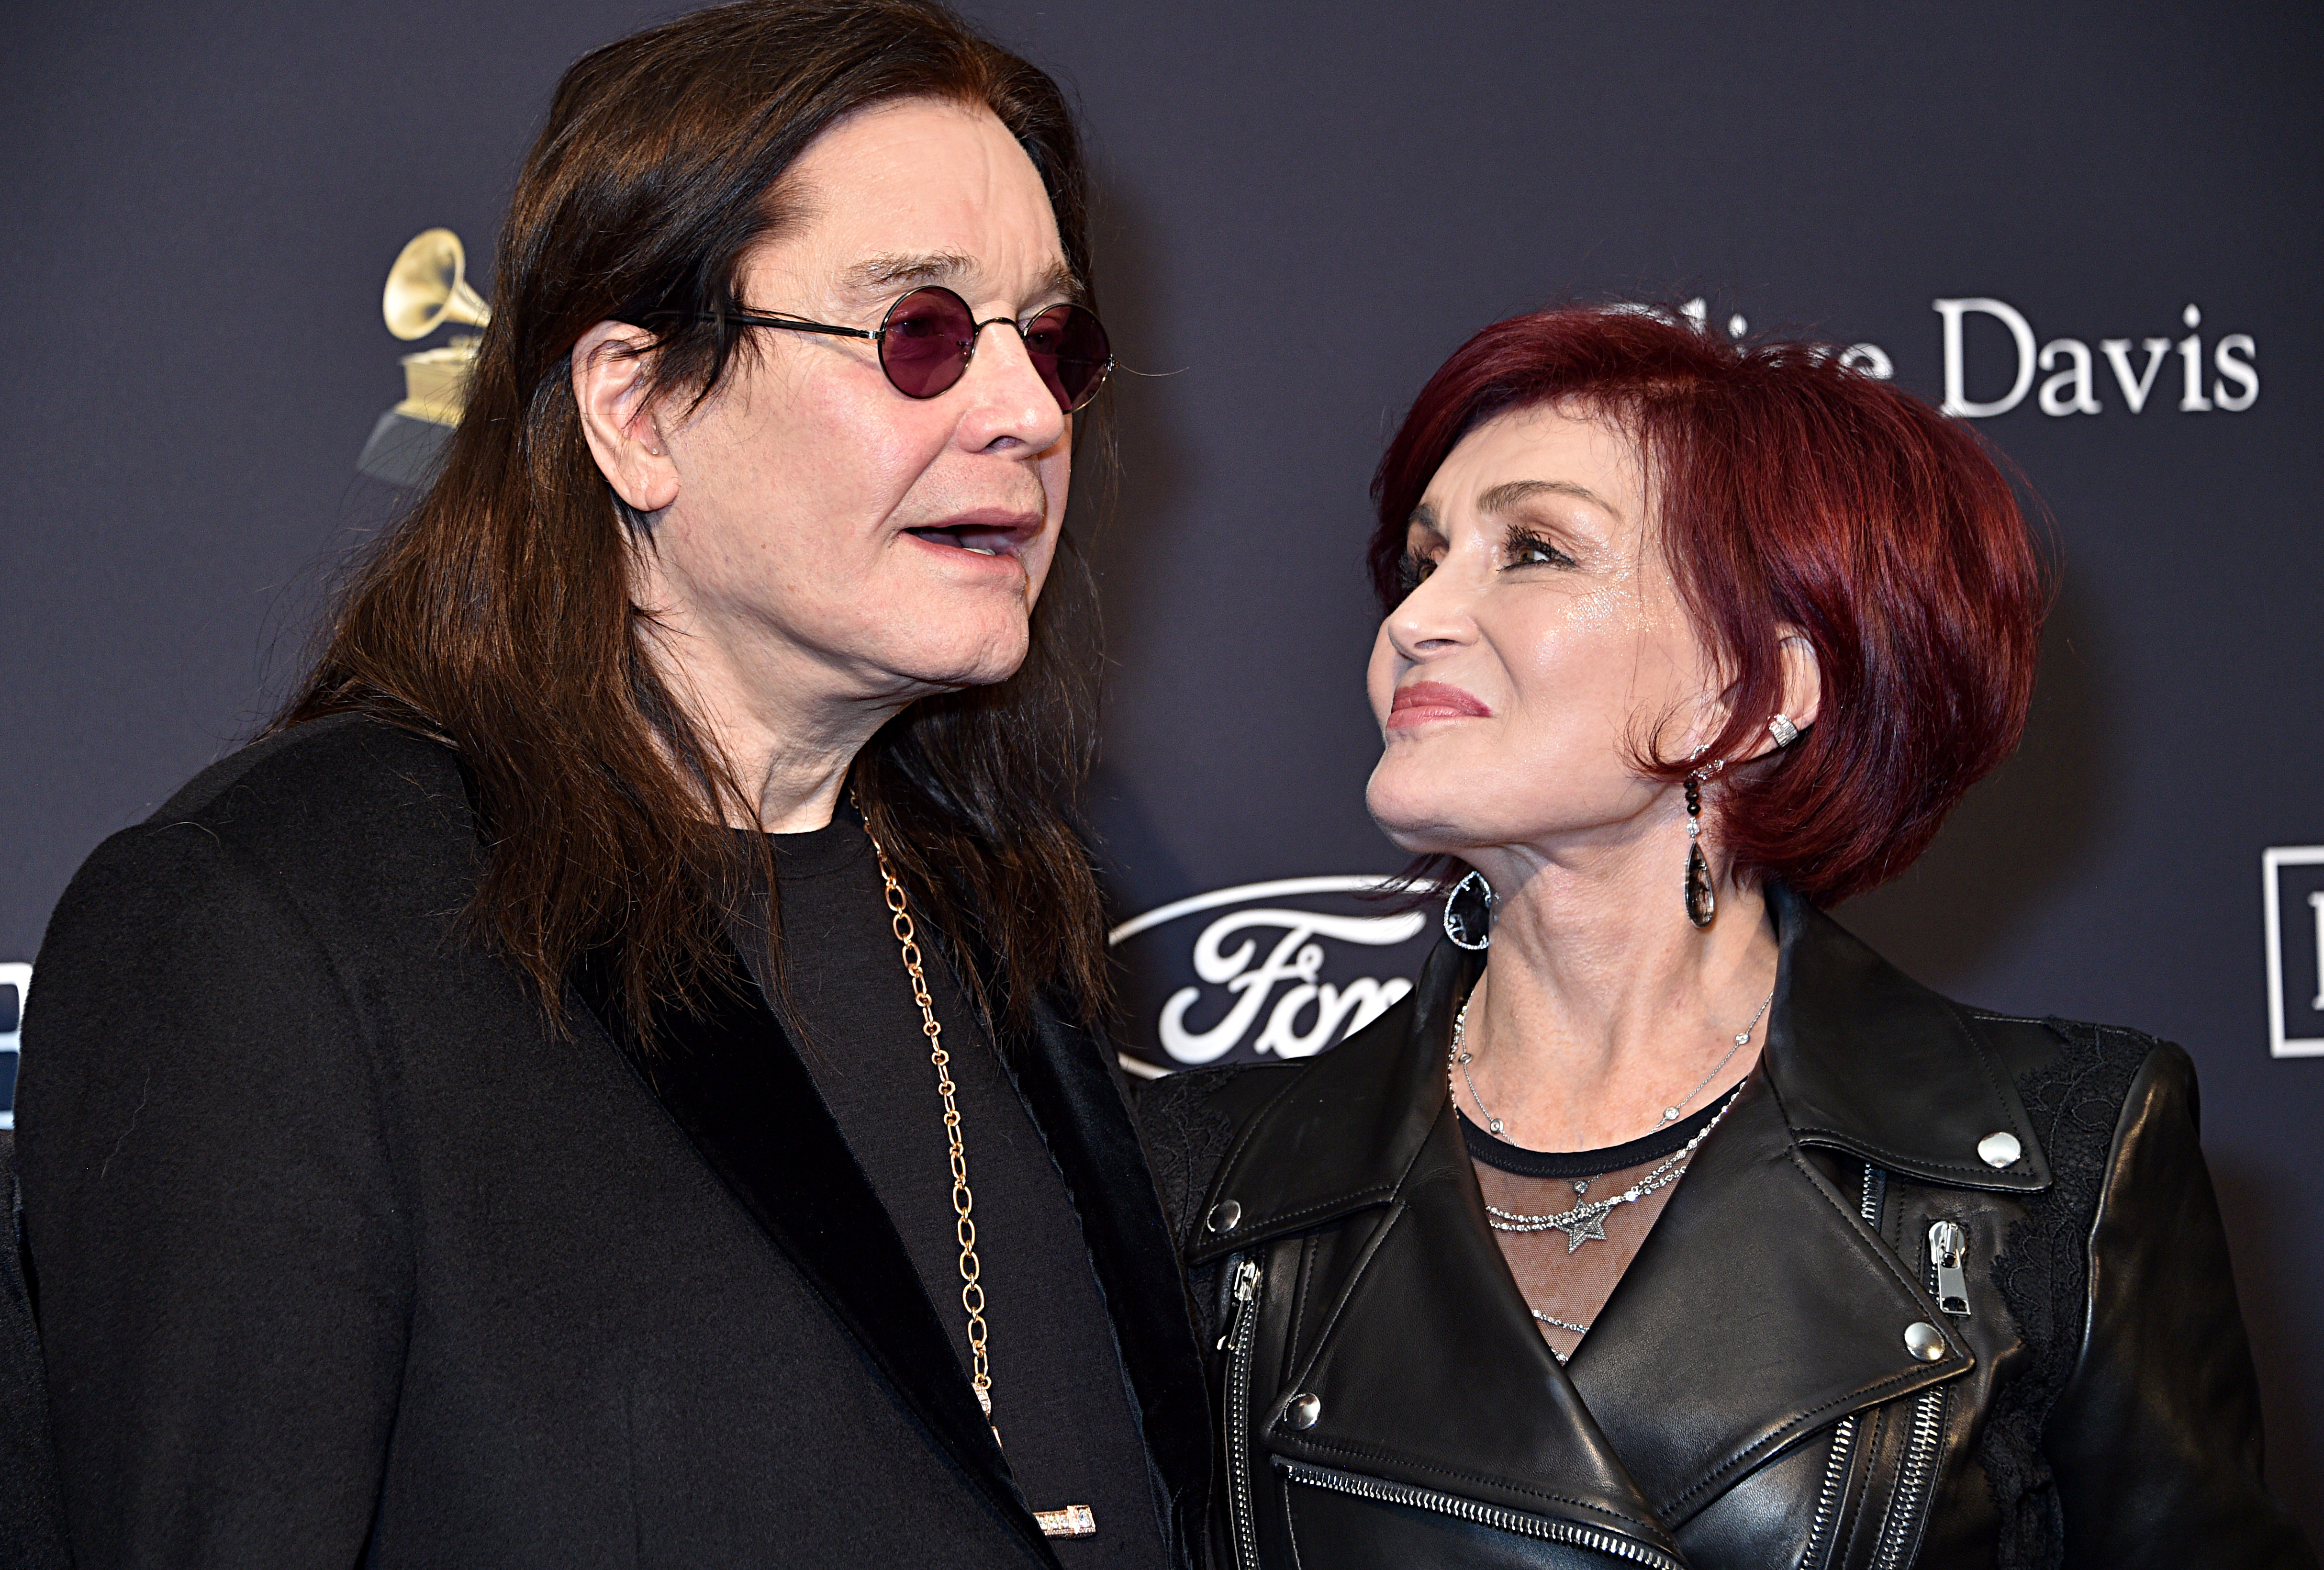 Ozzy Osbourne and Sharon Osbourne attend the Pre-GRAMMY Gala and GRAMMY Salute to Industry Icons Honoring Sean "Diddy" Combs on January 25, 2020 in Beverly Hills, California | Source: Getty Images